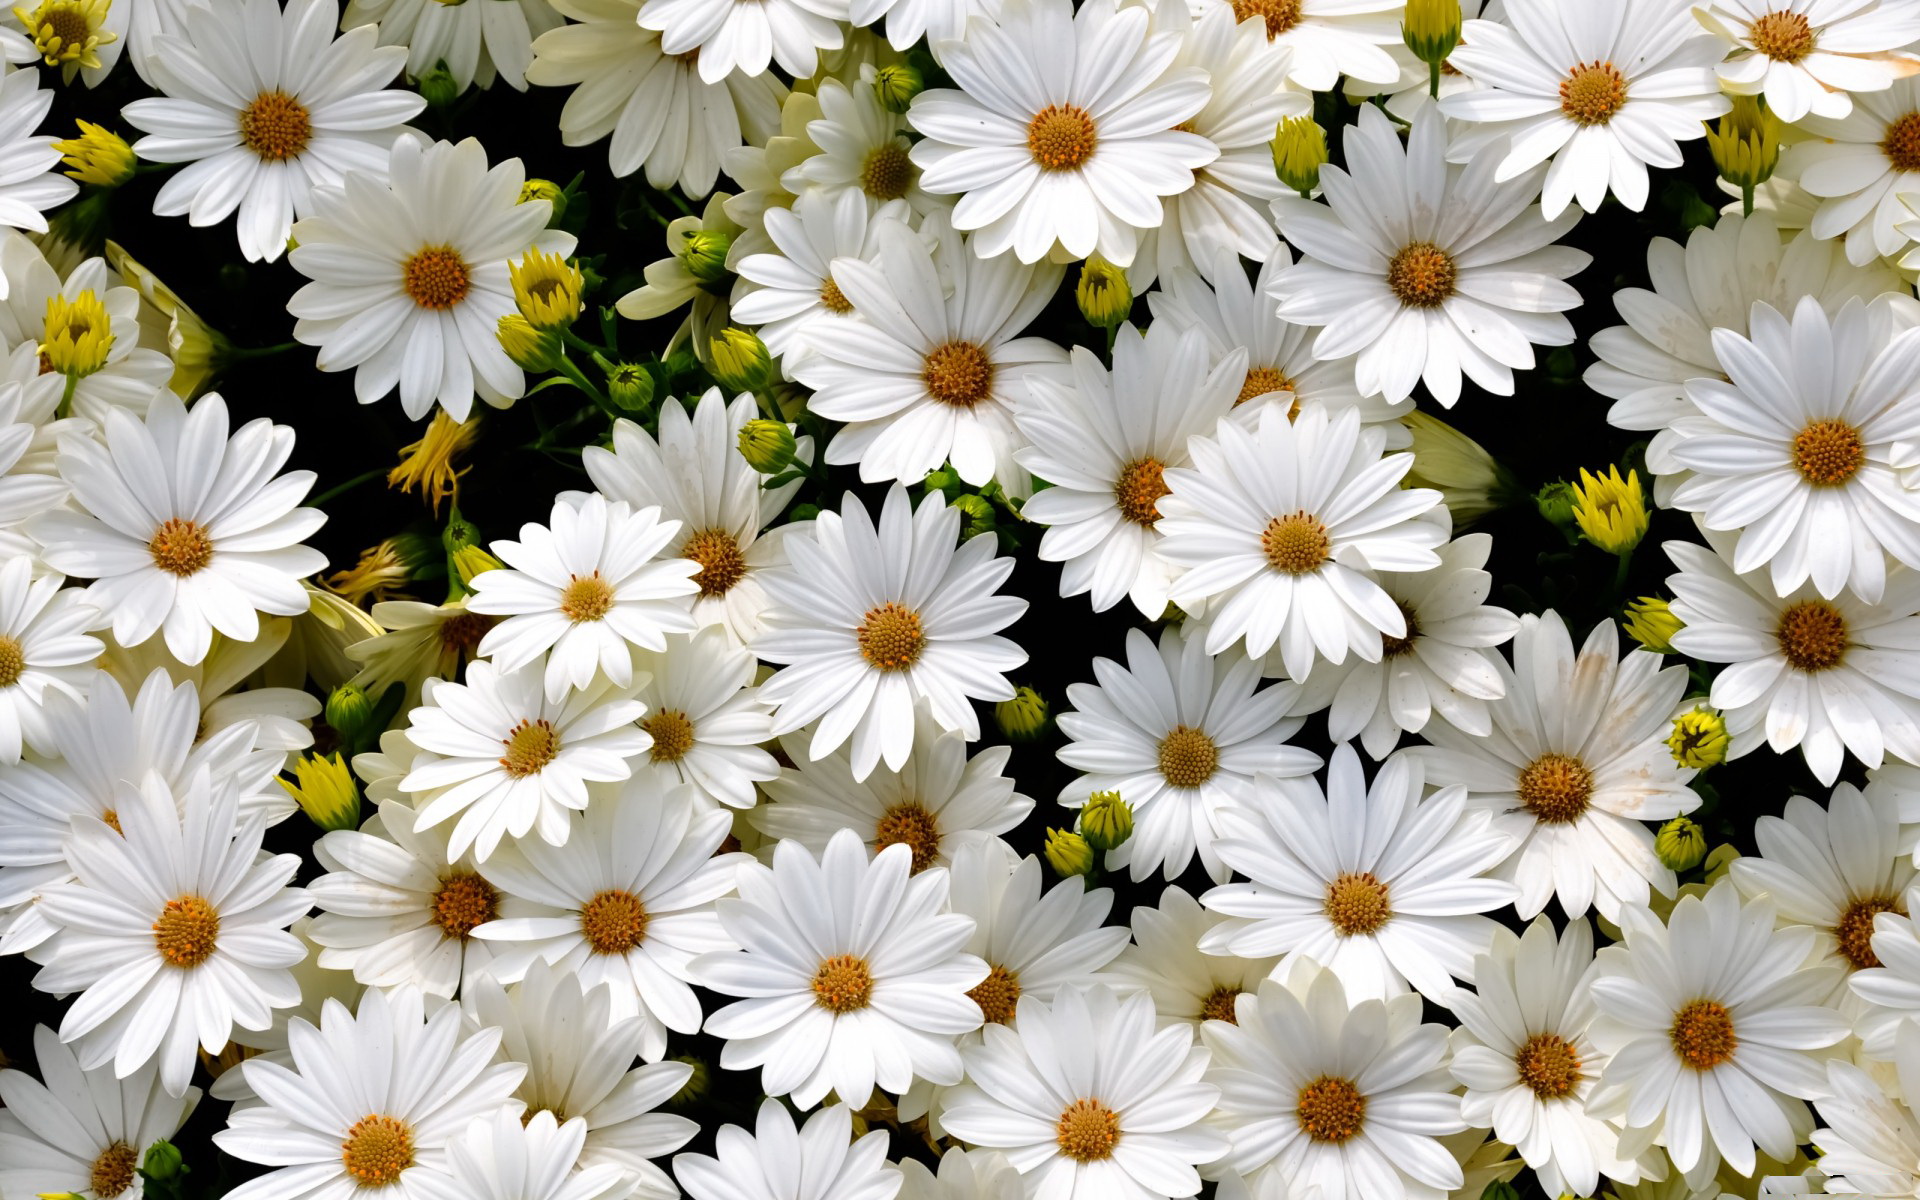 Daisy iPhone wallpapers